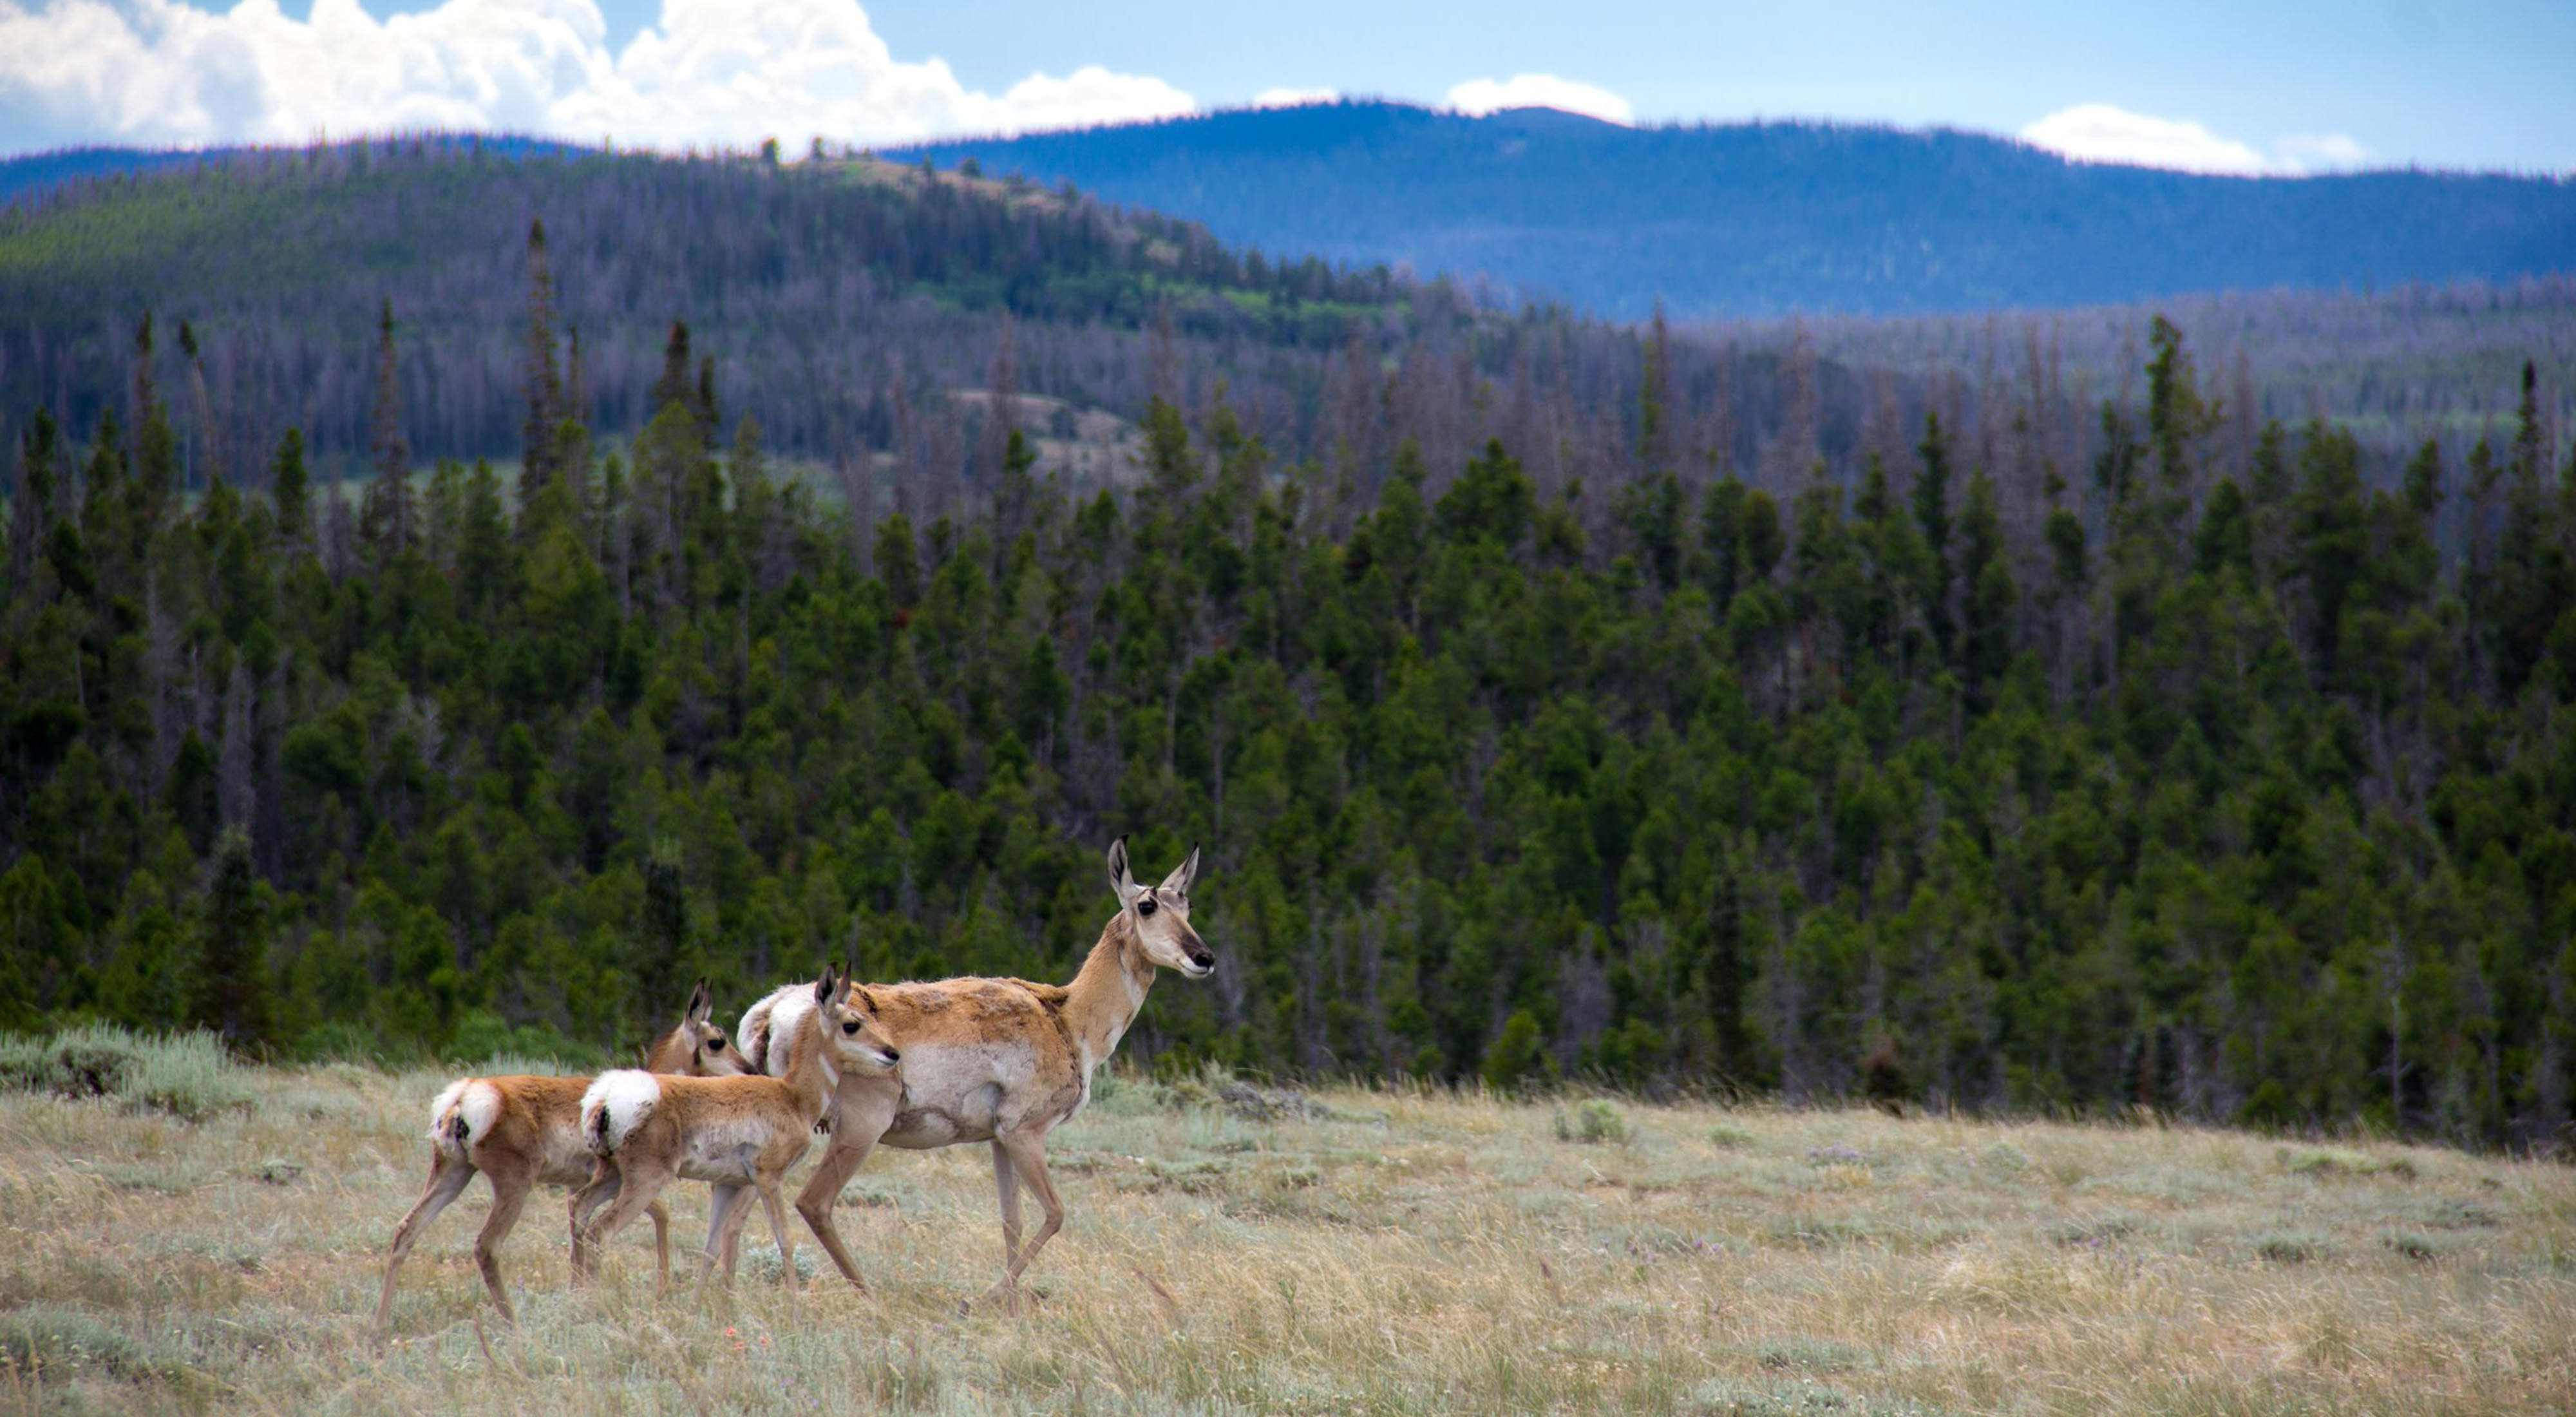 Antelope and her two fawns cross prairie in front of mountains.